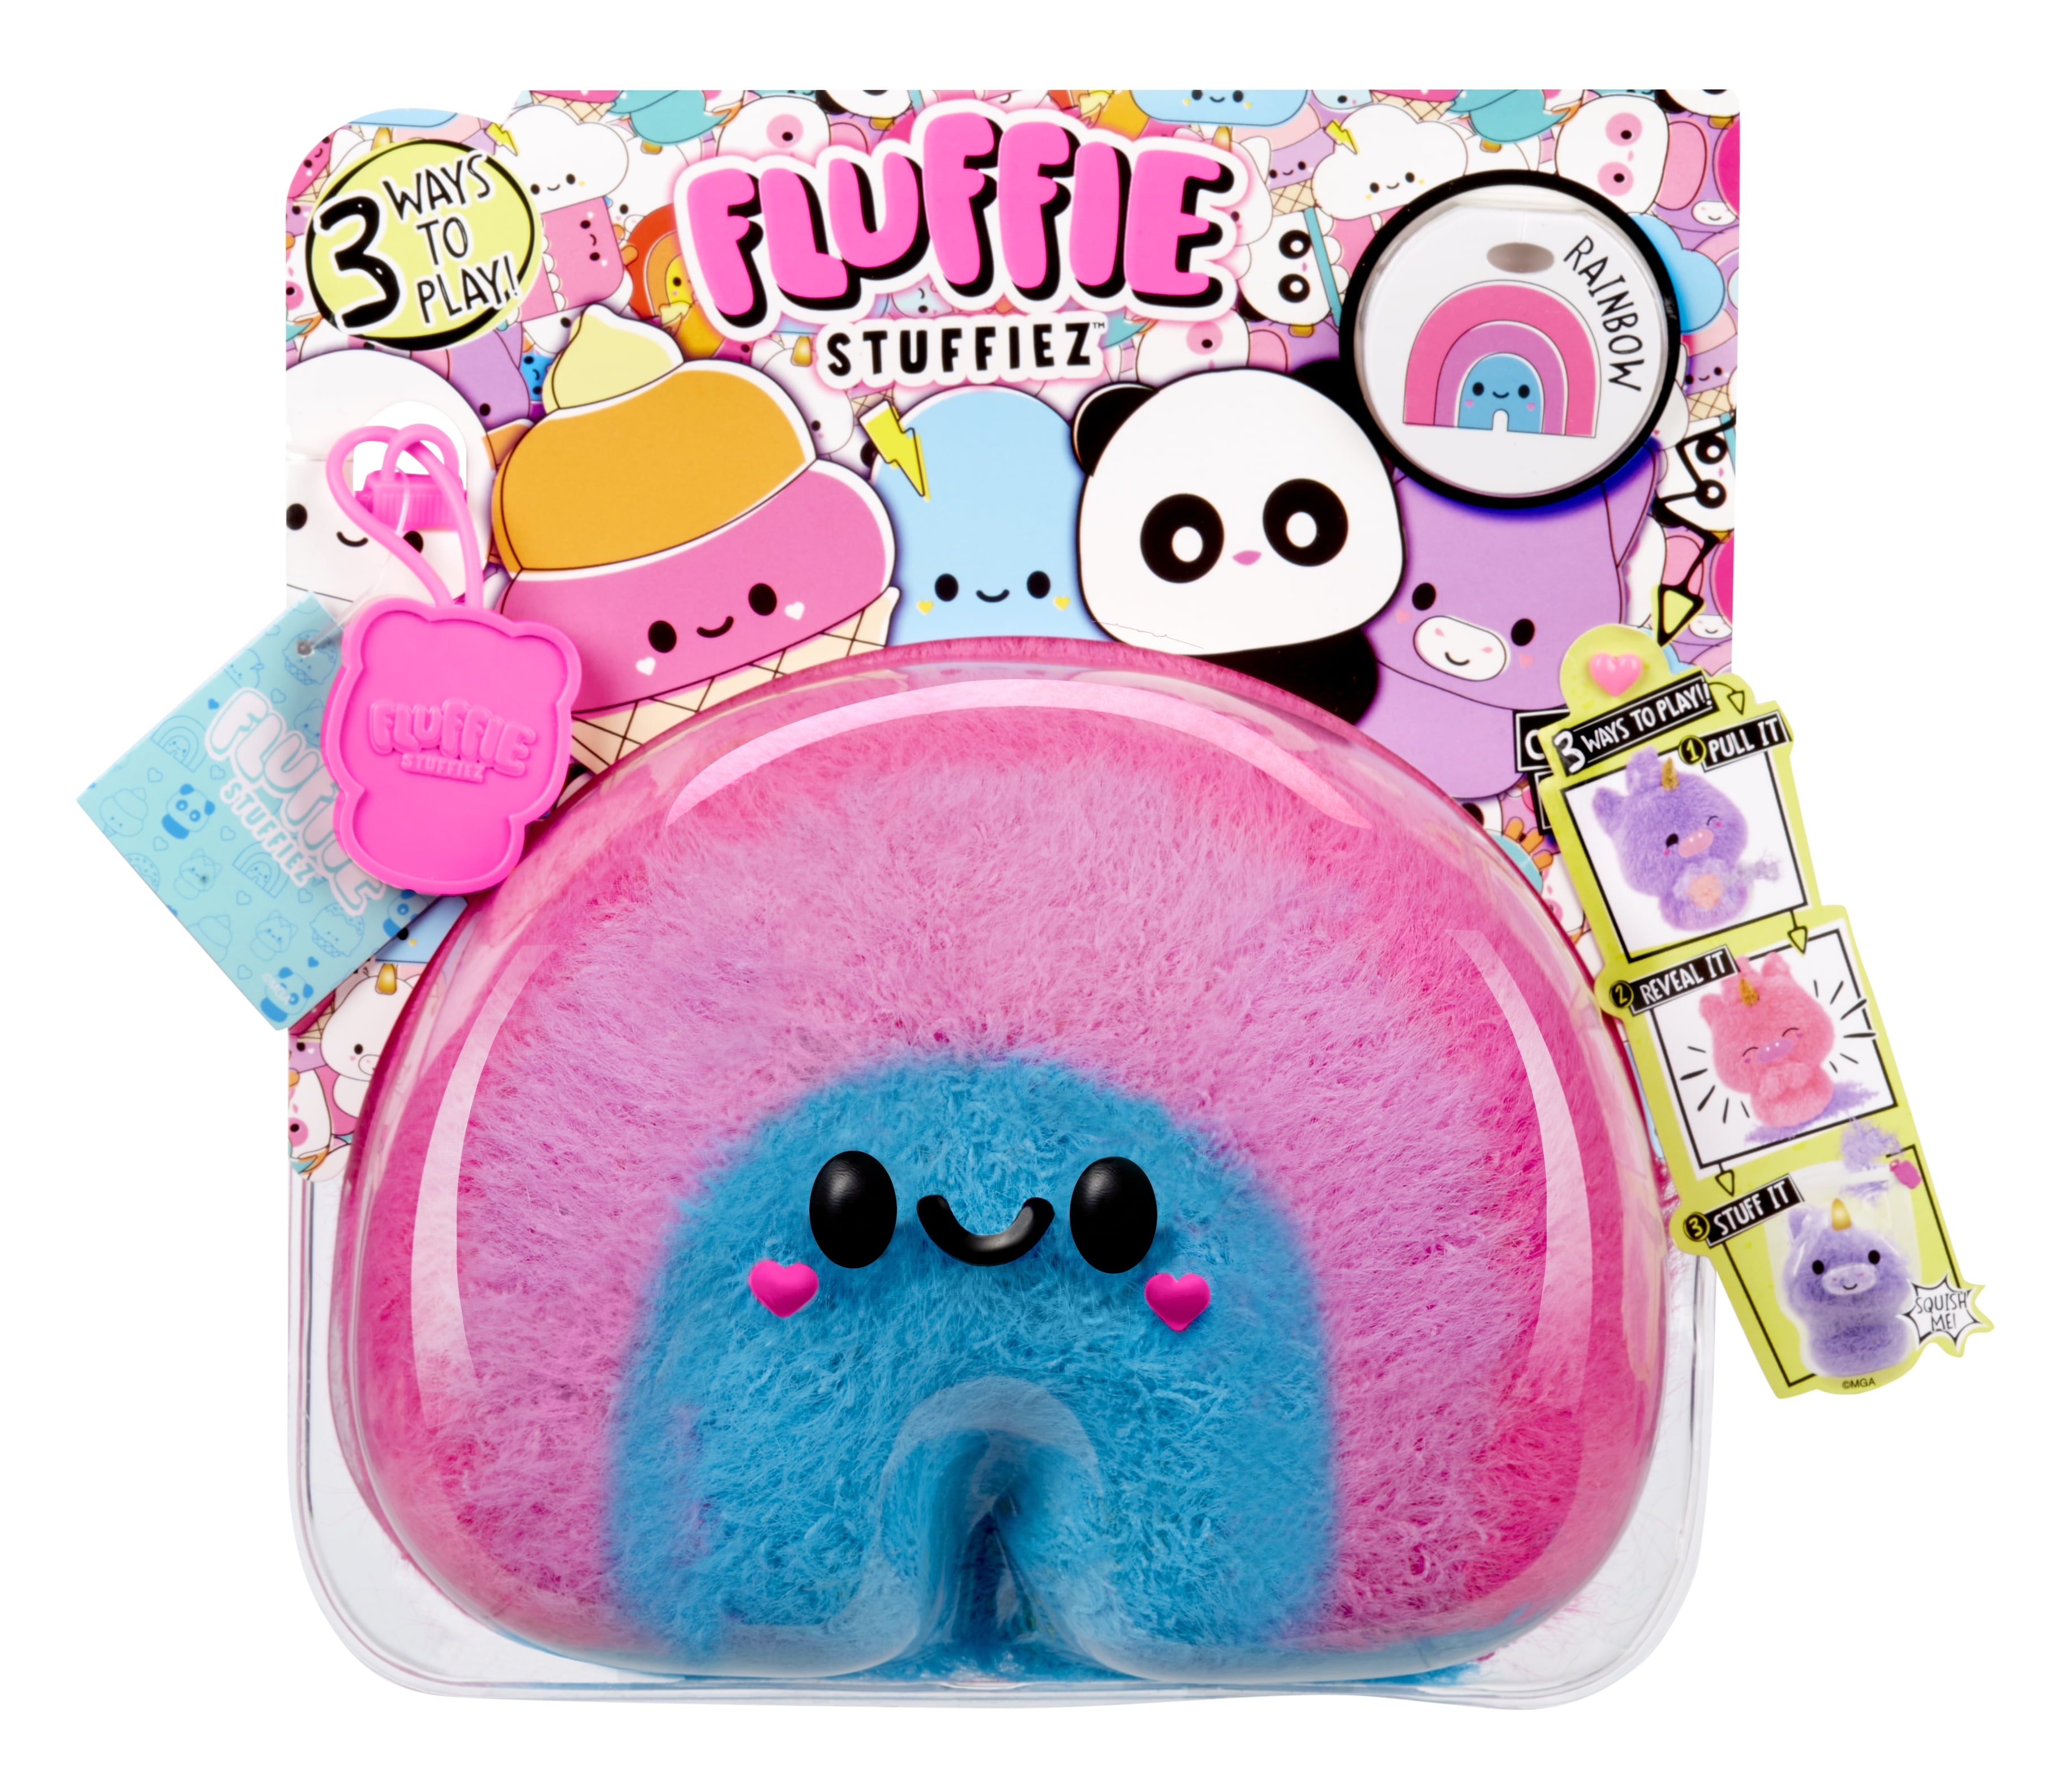 Fluffie Stuffiez Cake Small Collectible Feature Plush - Surprise